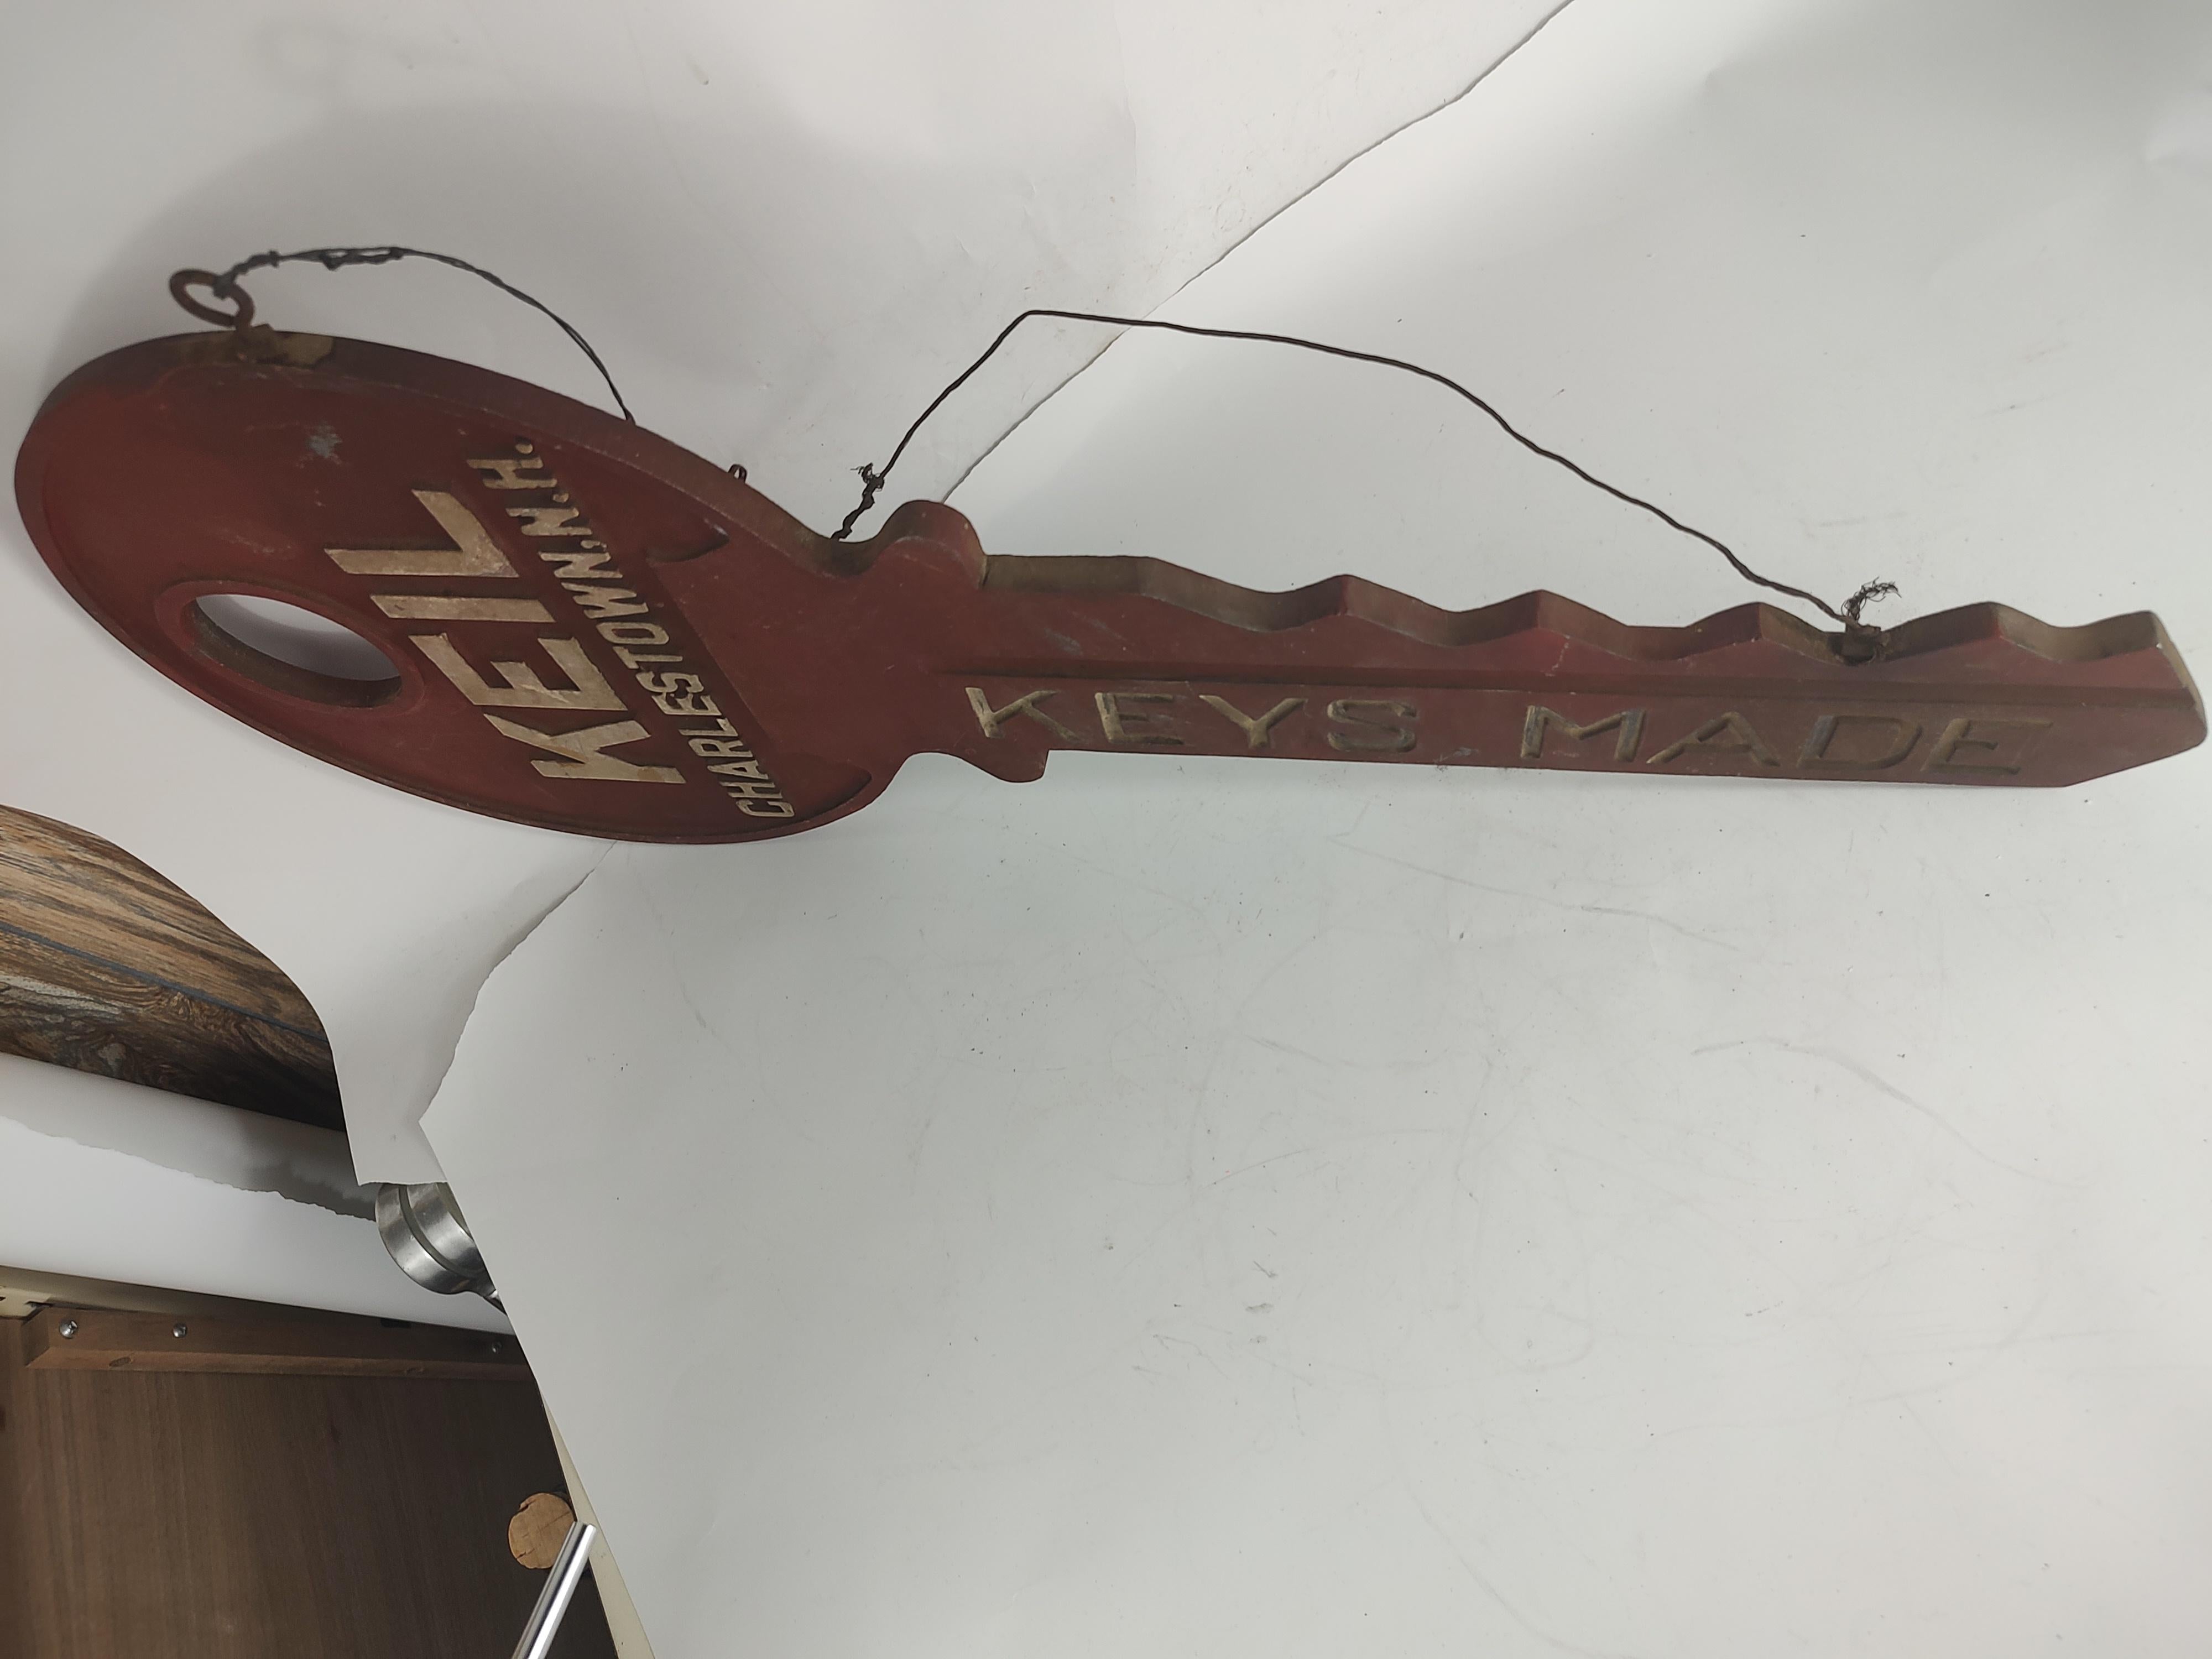 Fabulous cast aluminum trade sign circa 1945 depicting a actual key in red and silver. Perfect casting which retains its true color and material. Keil from Charlestown N.H. cast into the key along with 